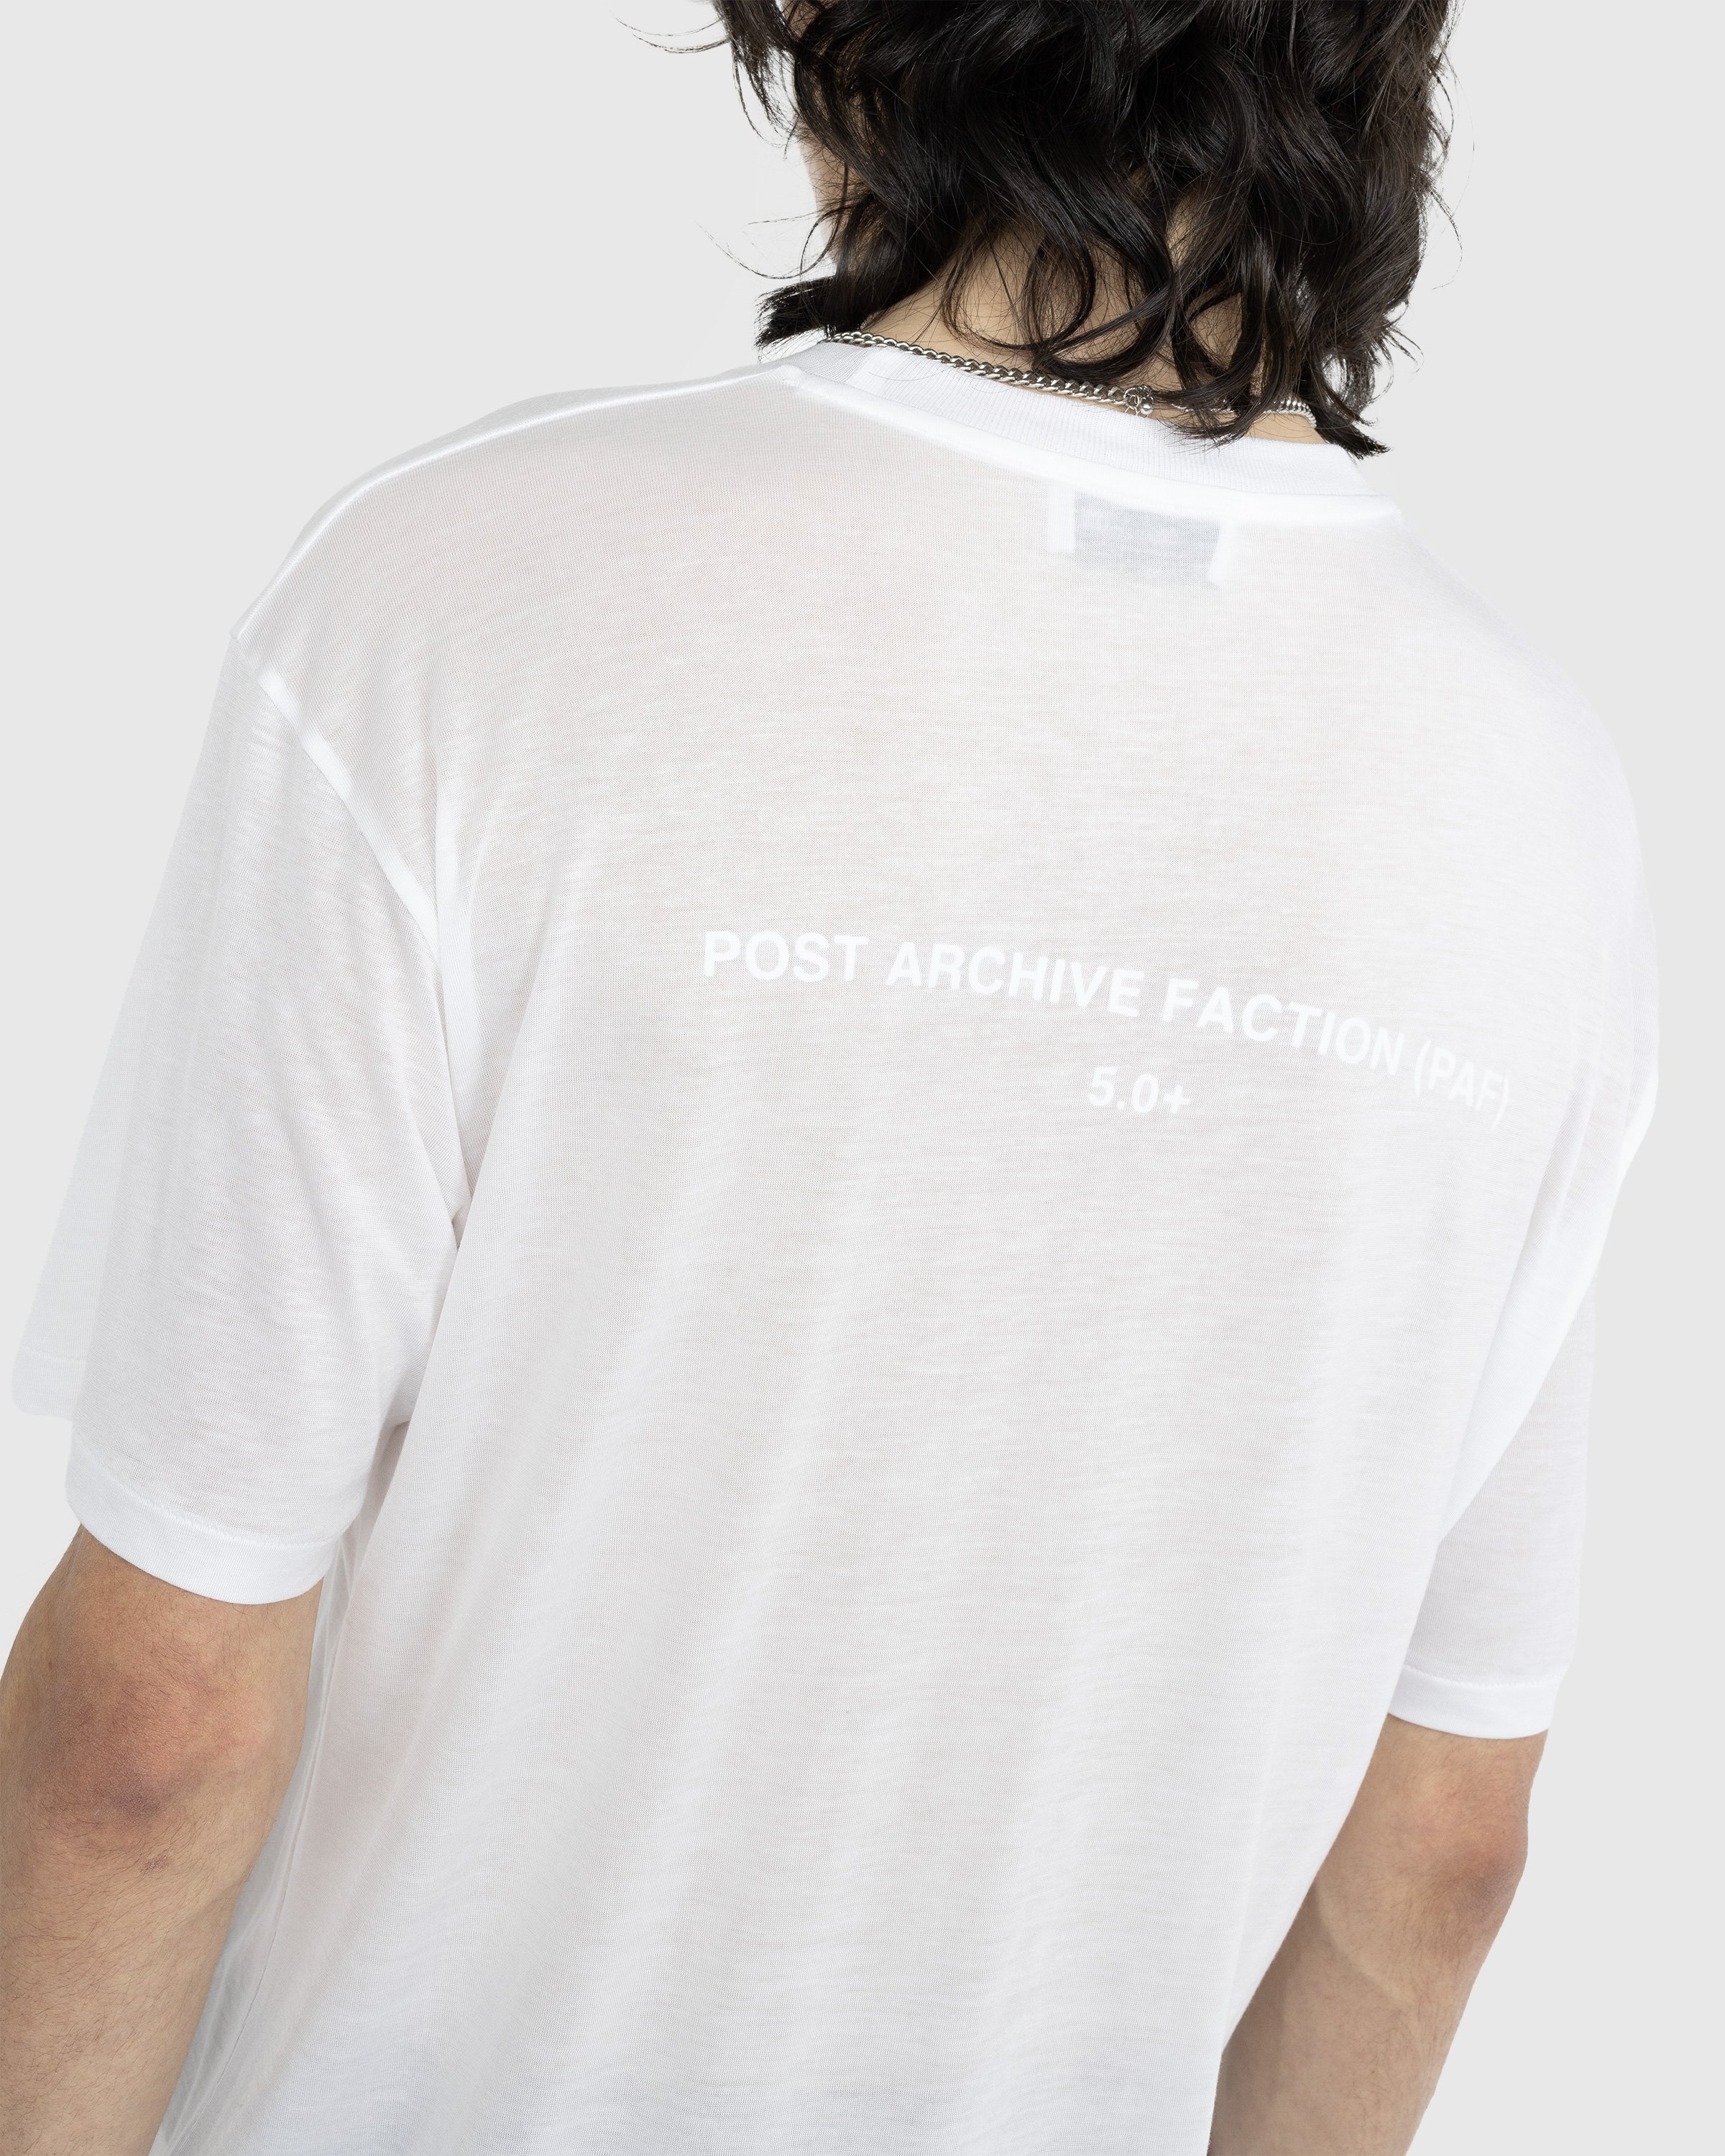 Post Archive Faction (PAF) - 5.0+ Tee Right White - Clothing - White - Image 4